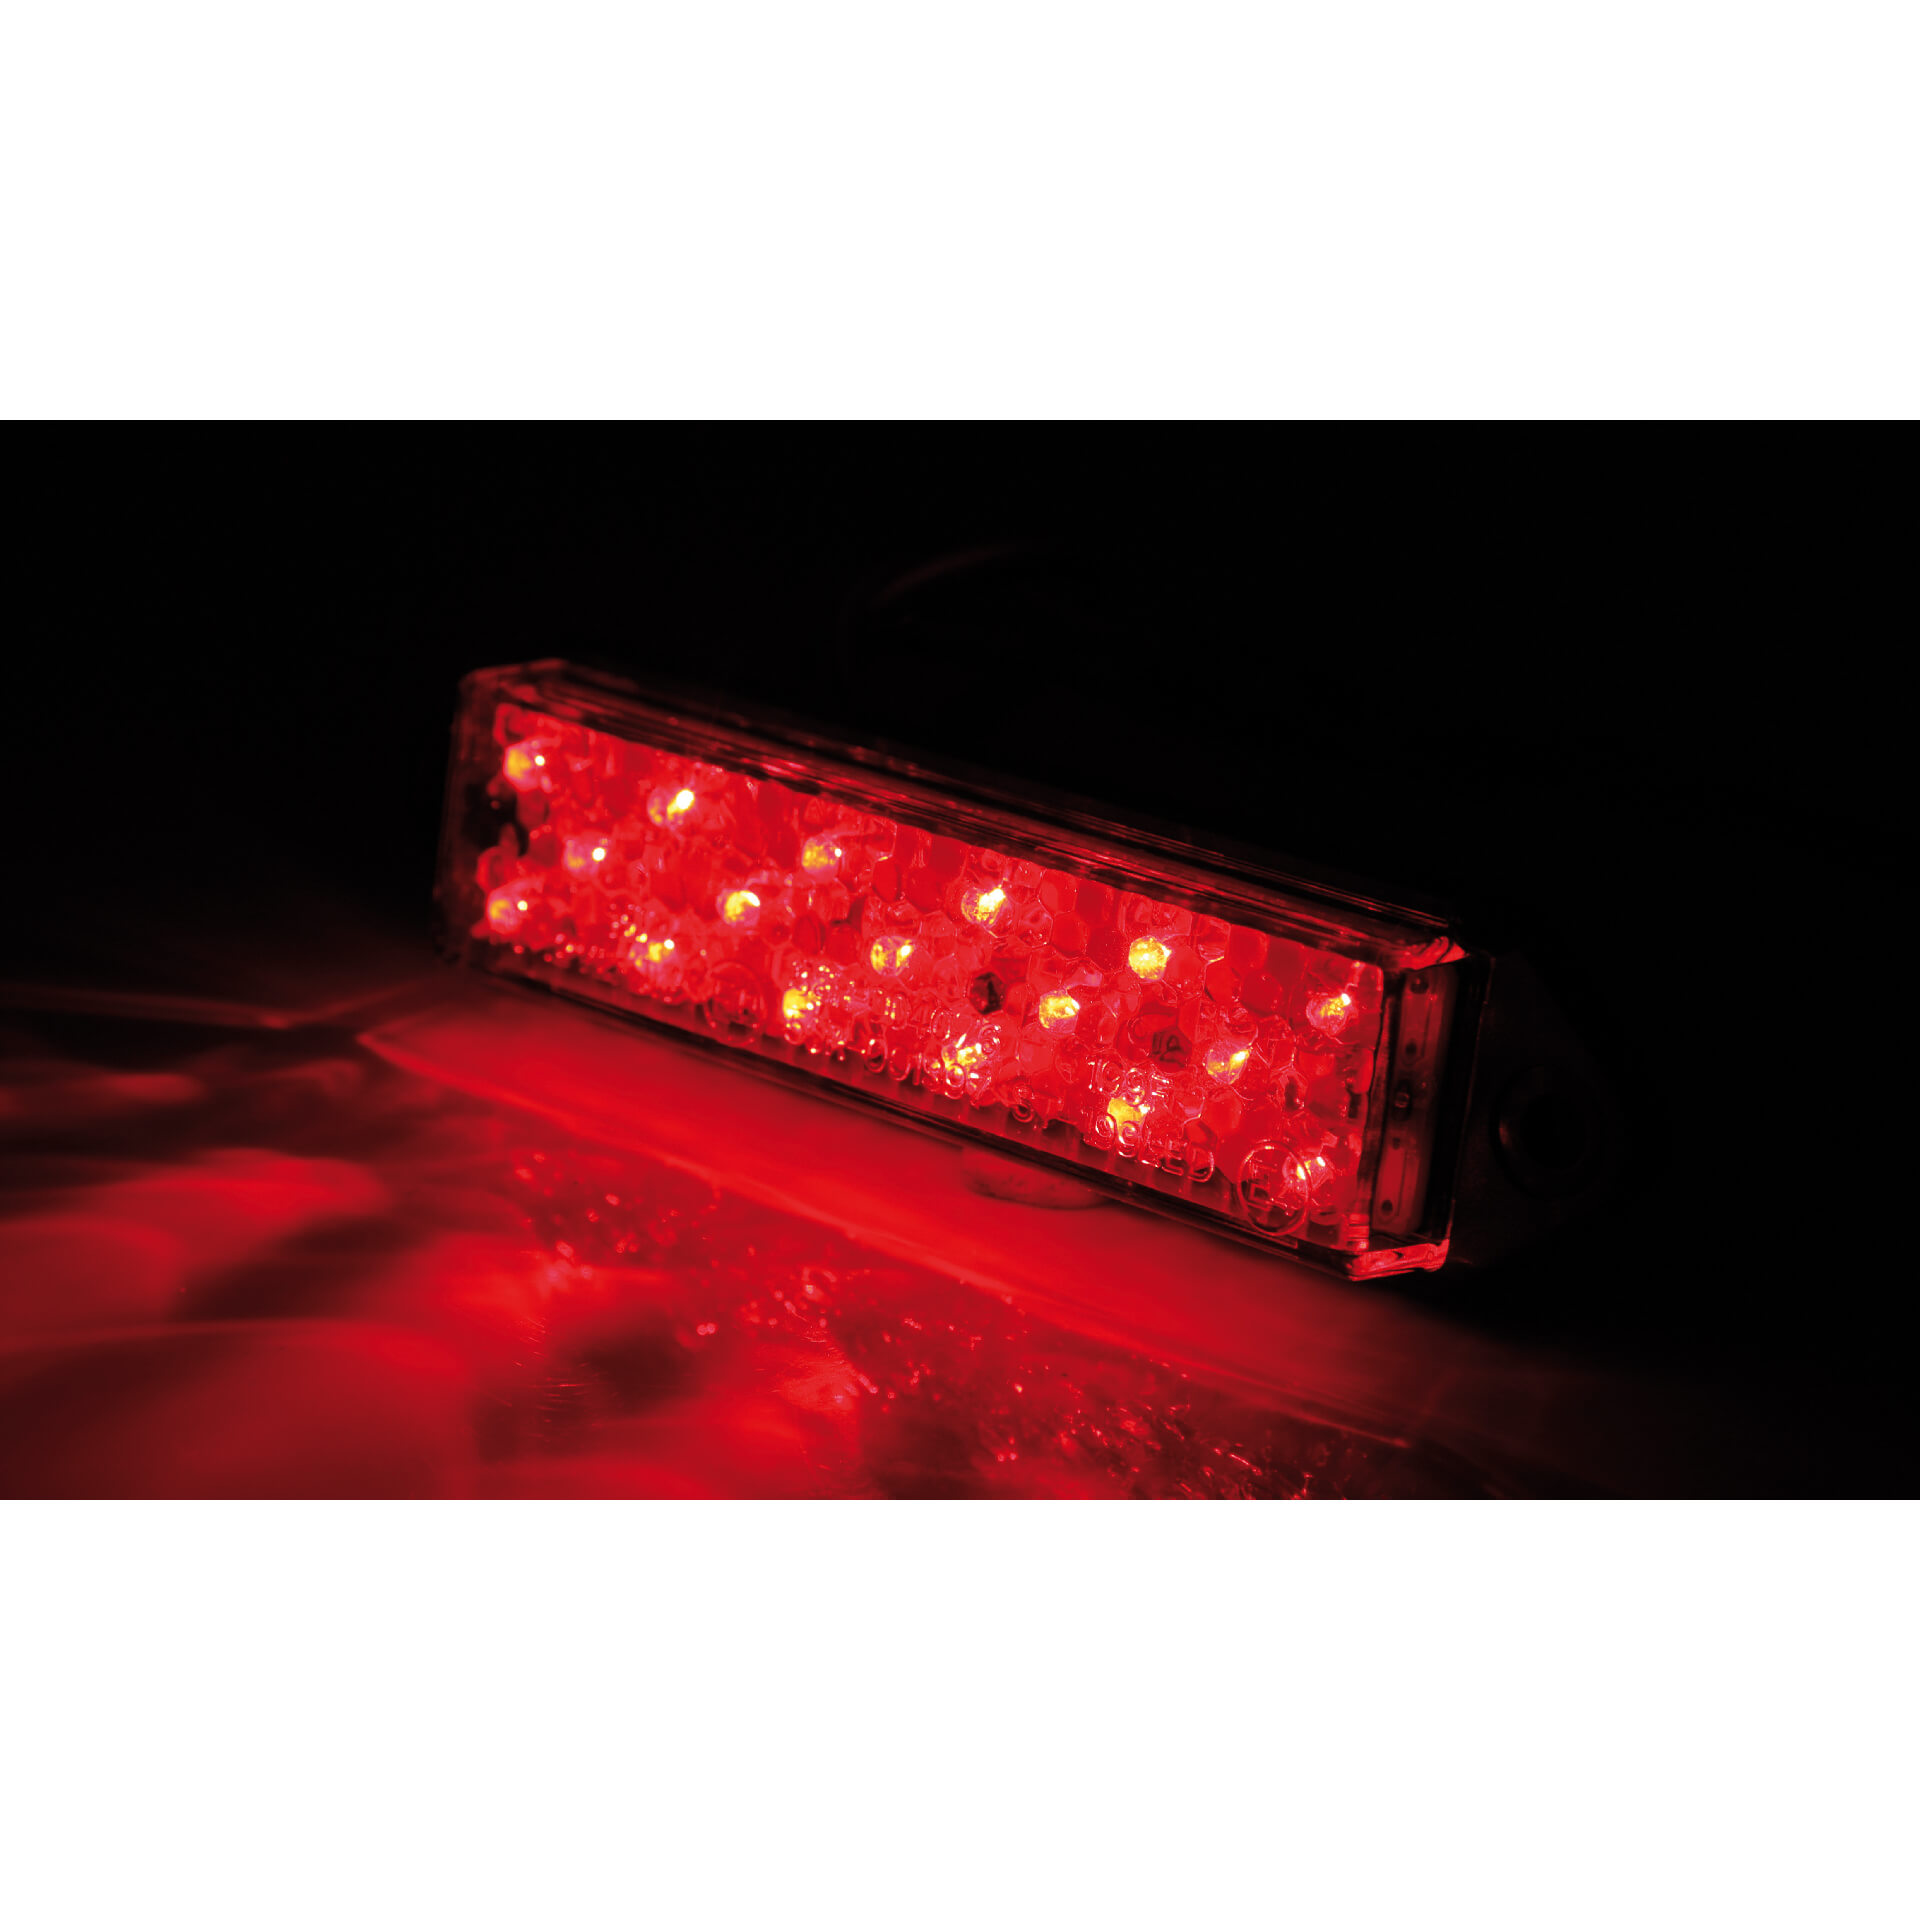 shin_yo LED taillight, SUPERFLAT, clear glass, with fixing straps, E-approved